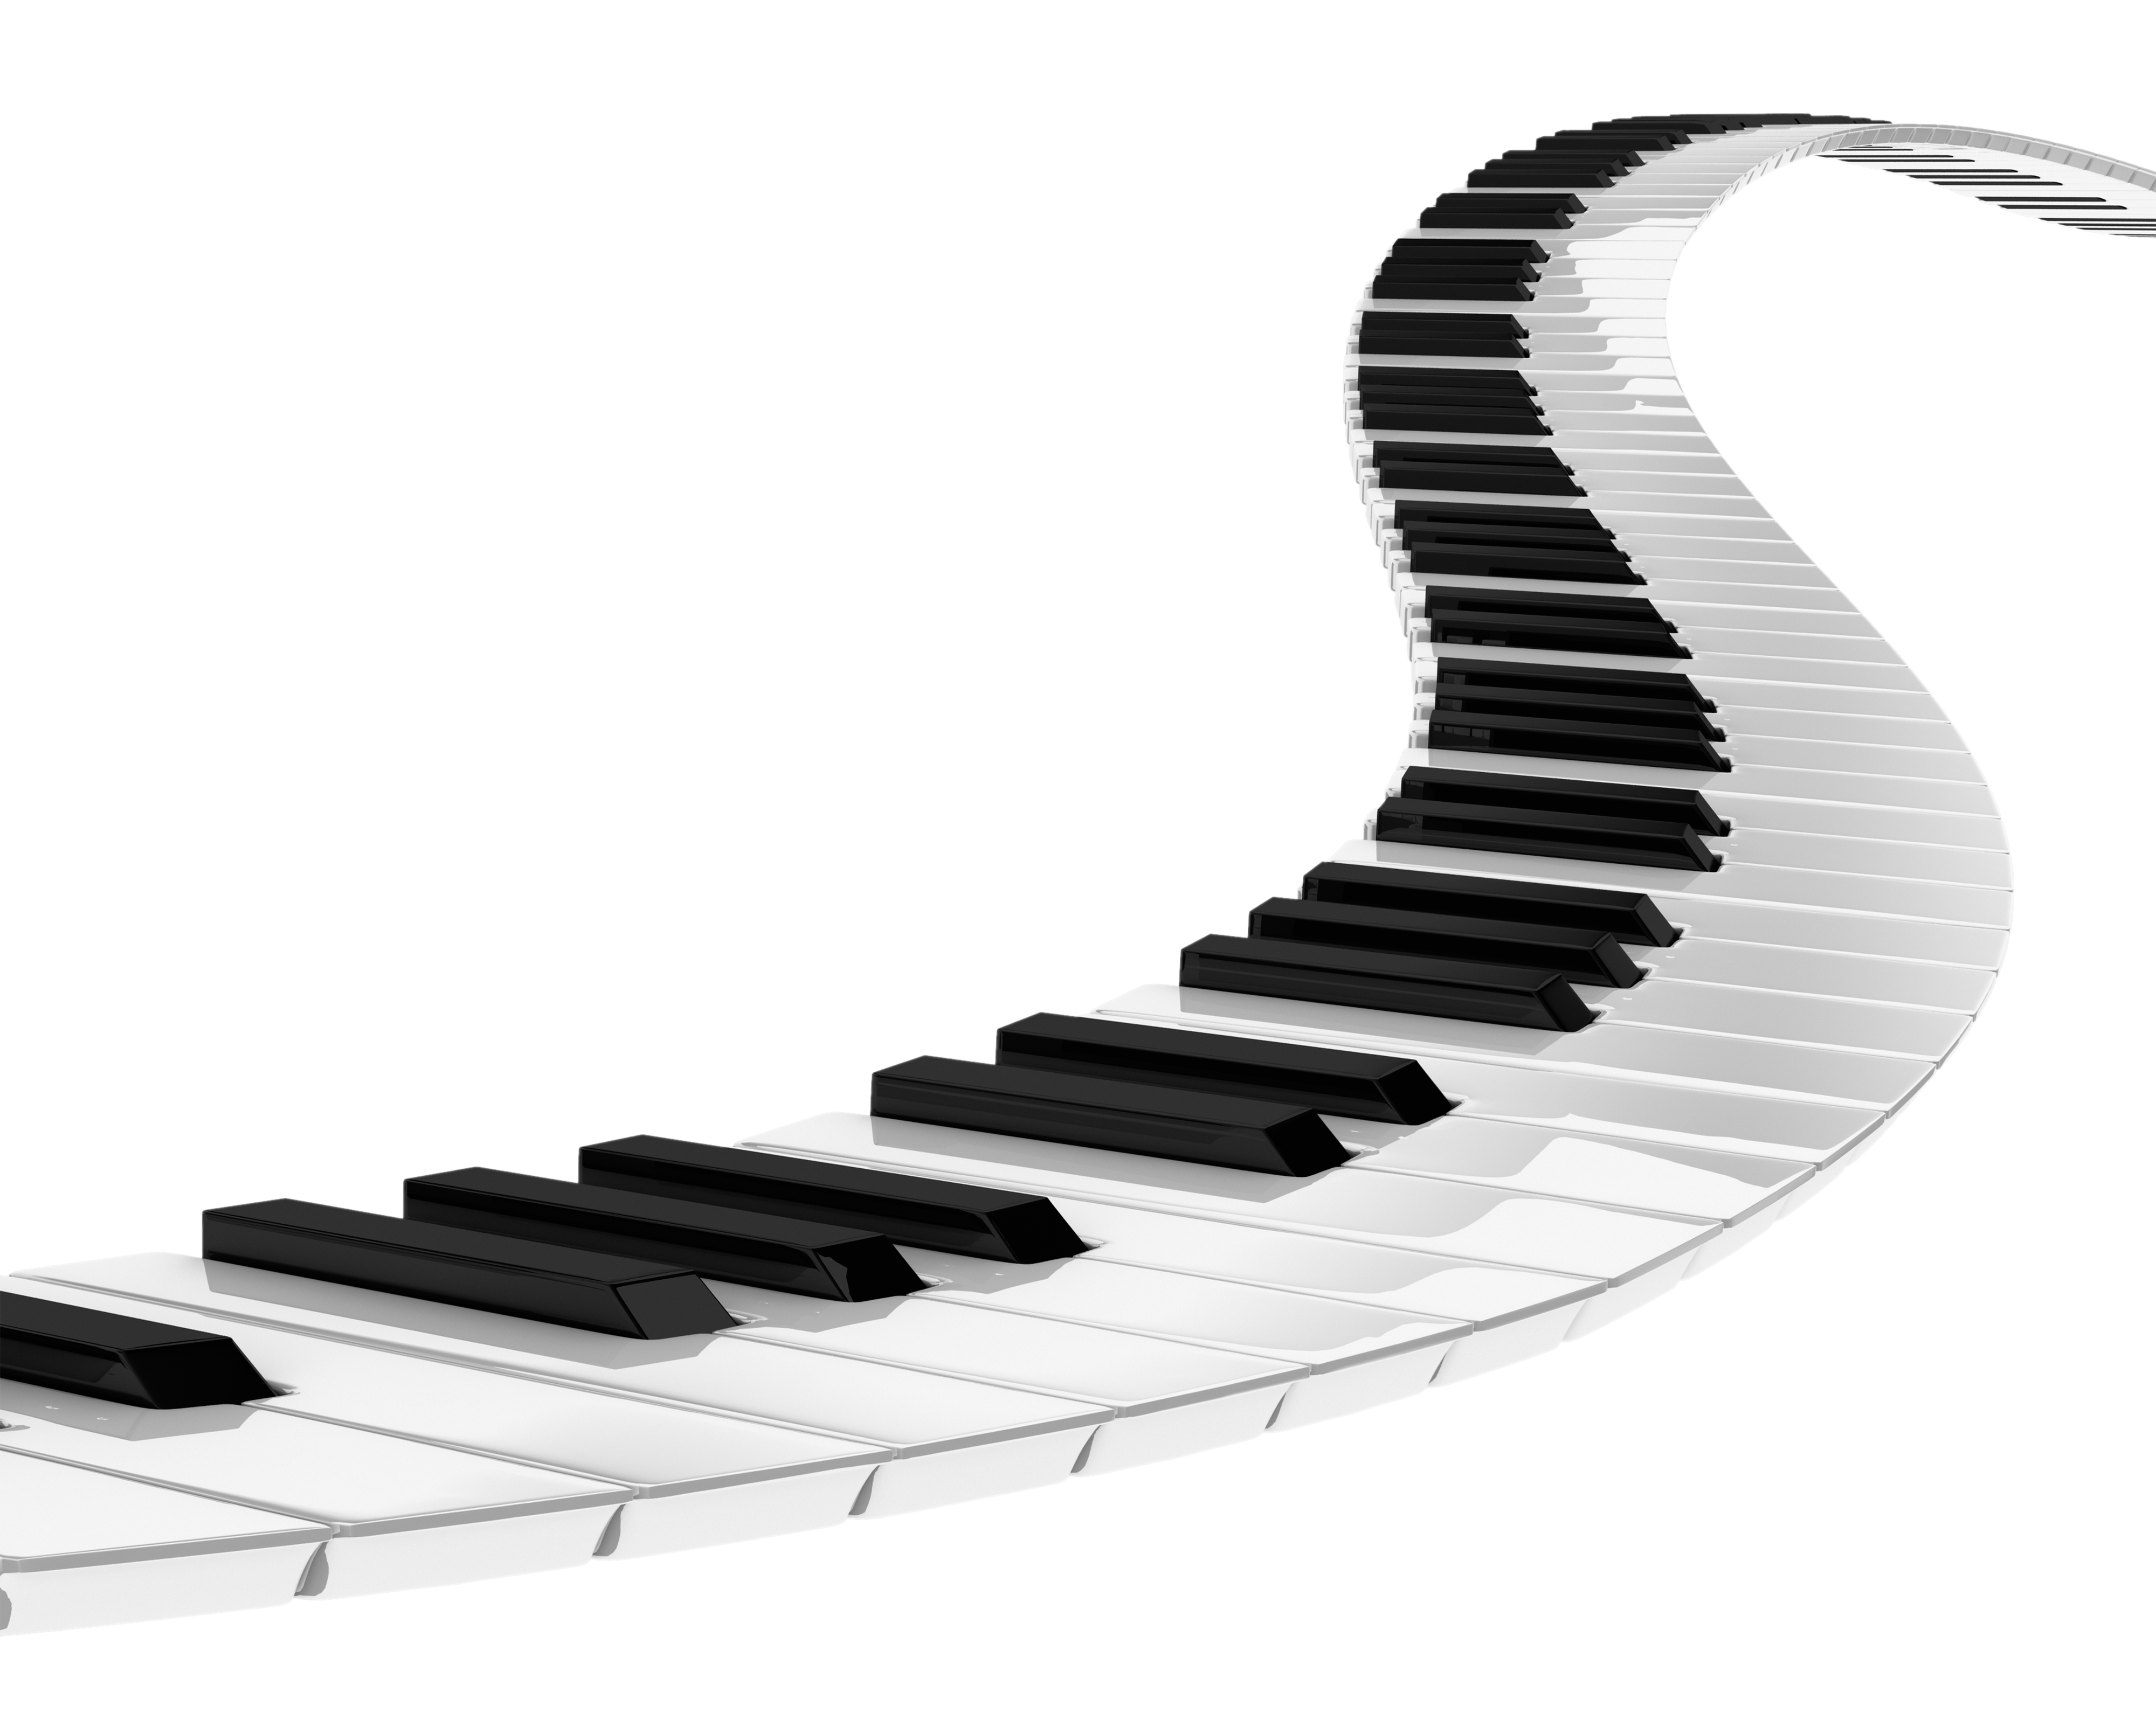 Piano Ladder Transparent PNG Clipart Picture.